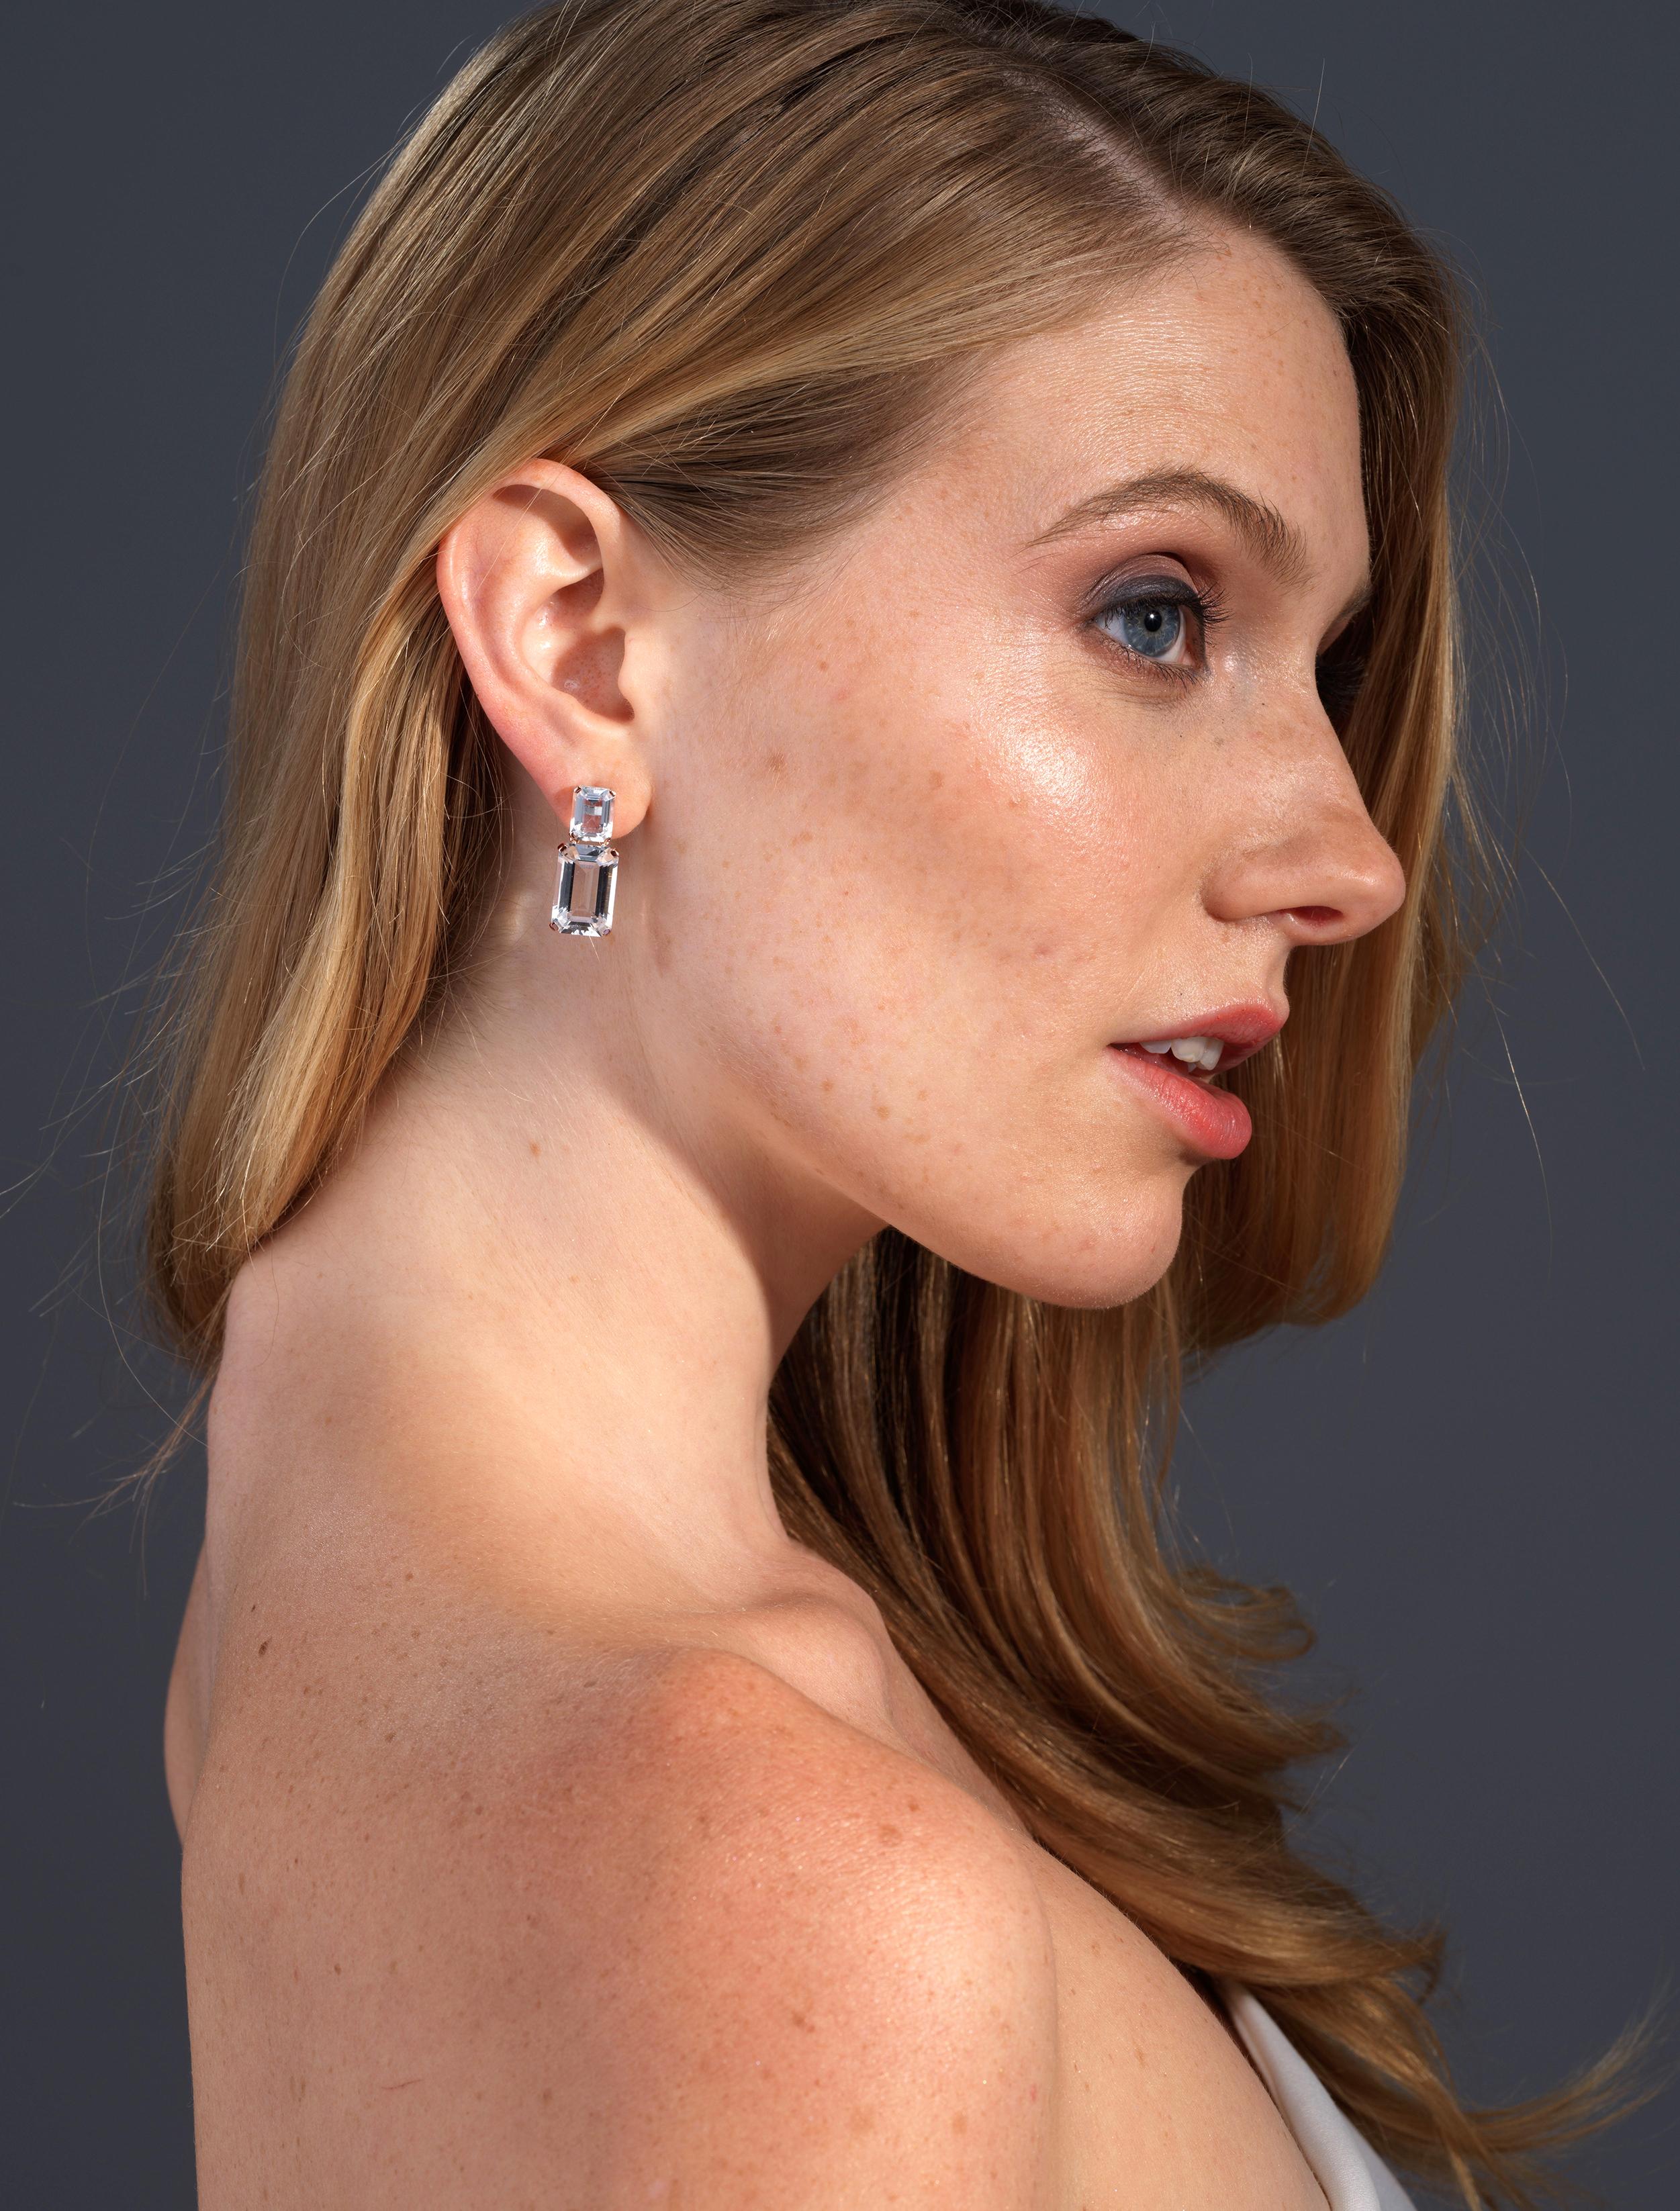 These Rock Crystal Emerald Cut Earrings in 18K Rose Gold from the 'Gossip' Collection are a stunning and unique accessory. The clear, transparent beauty of the rock crystal, combined with the elegant emerald cut design, creates a timeless and